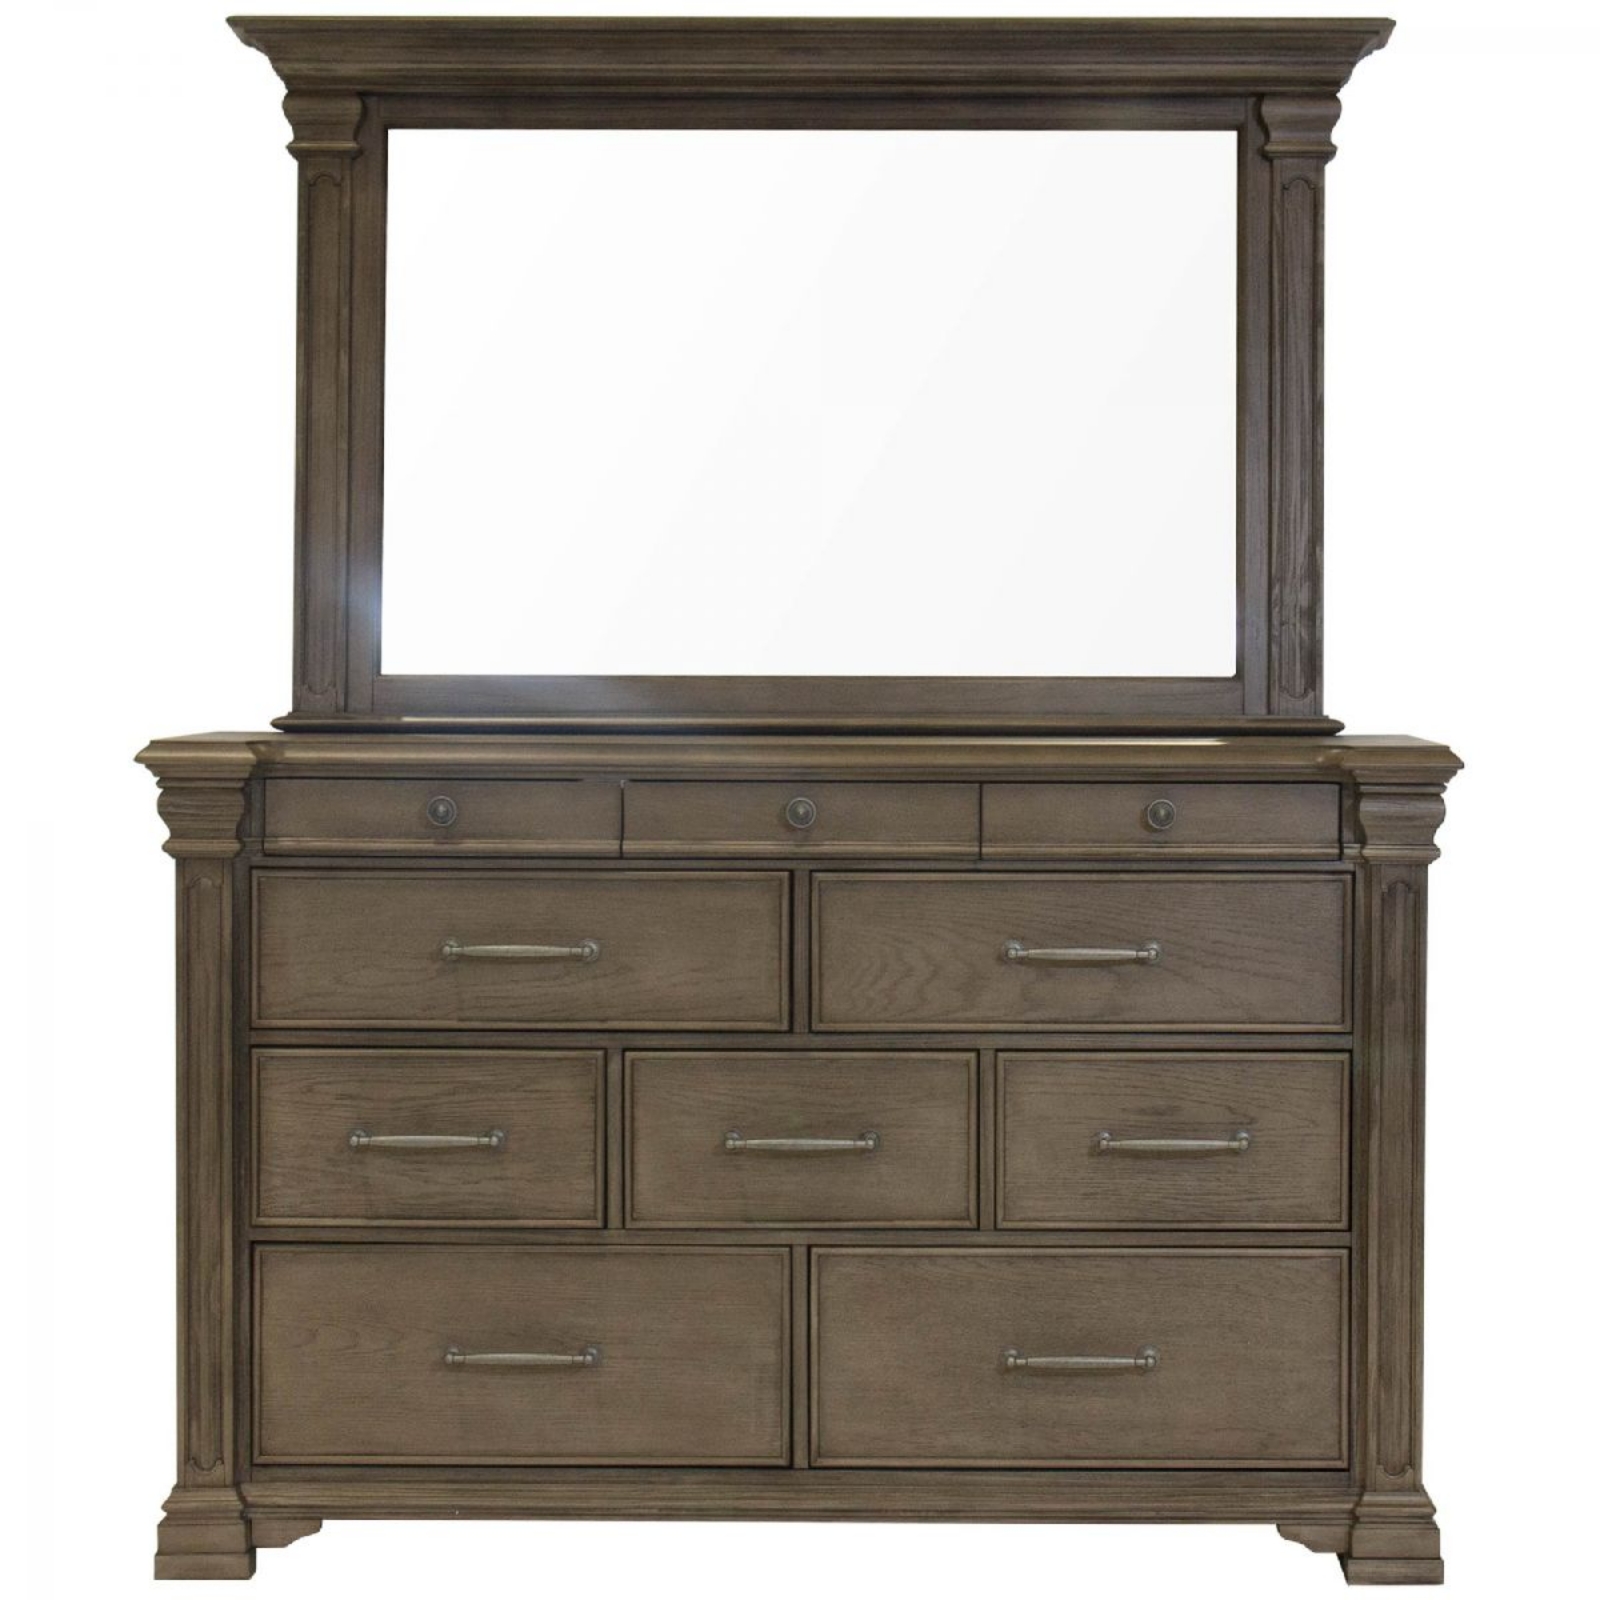 Picture of Kings Court Dresser & Mirror